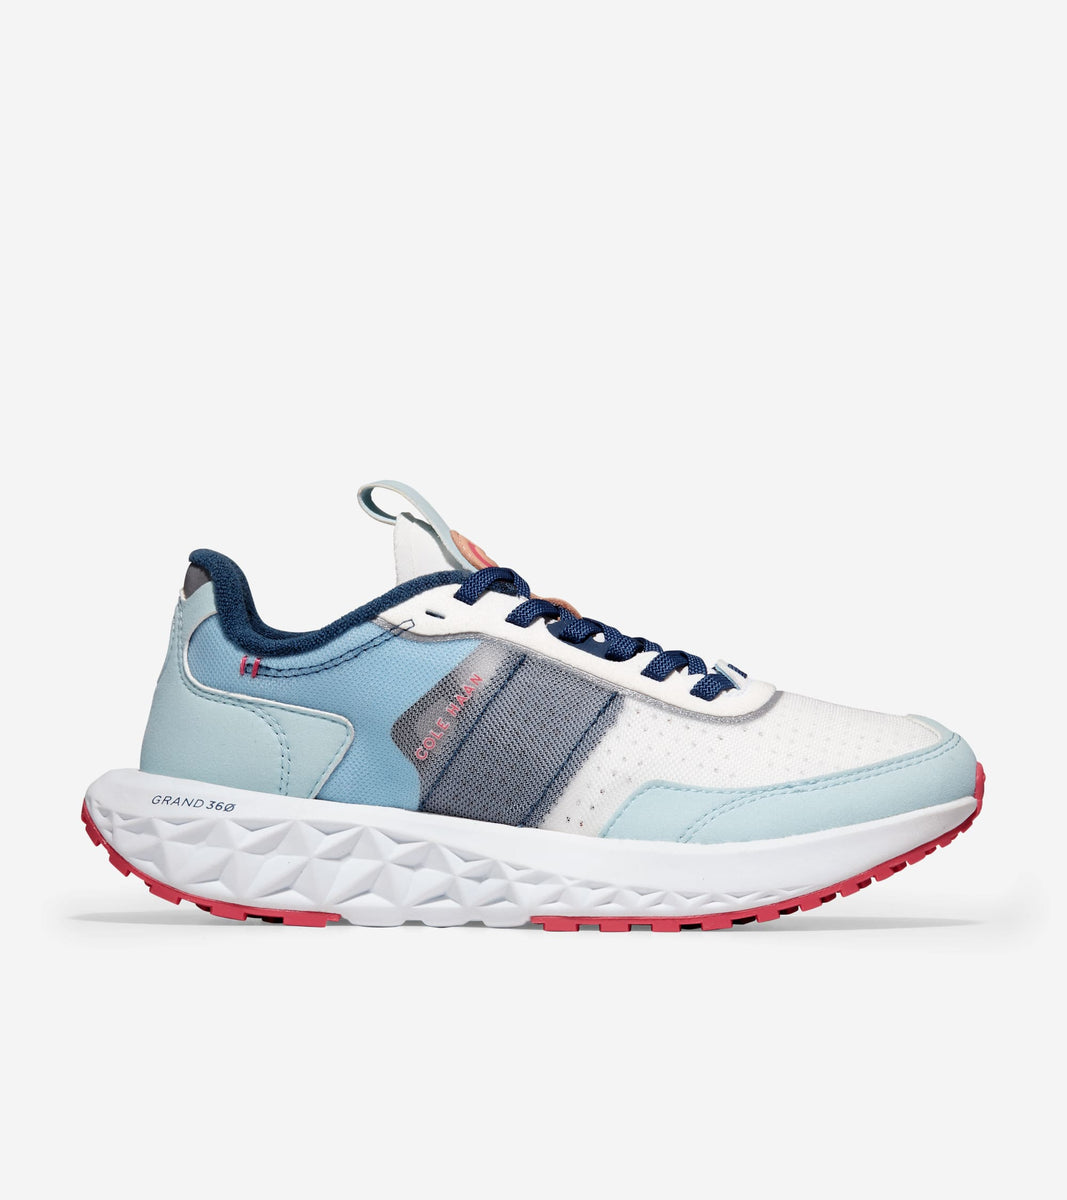 W28126:OXFORD BLUE/ENSIGN BLUE/OPTIC WHITETenis Mujer Women's ZERØGRAND Outpace 3 | Cole Haan Colombia